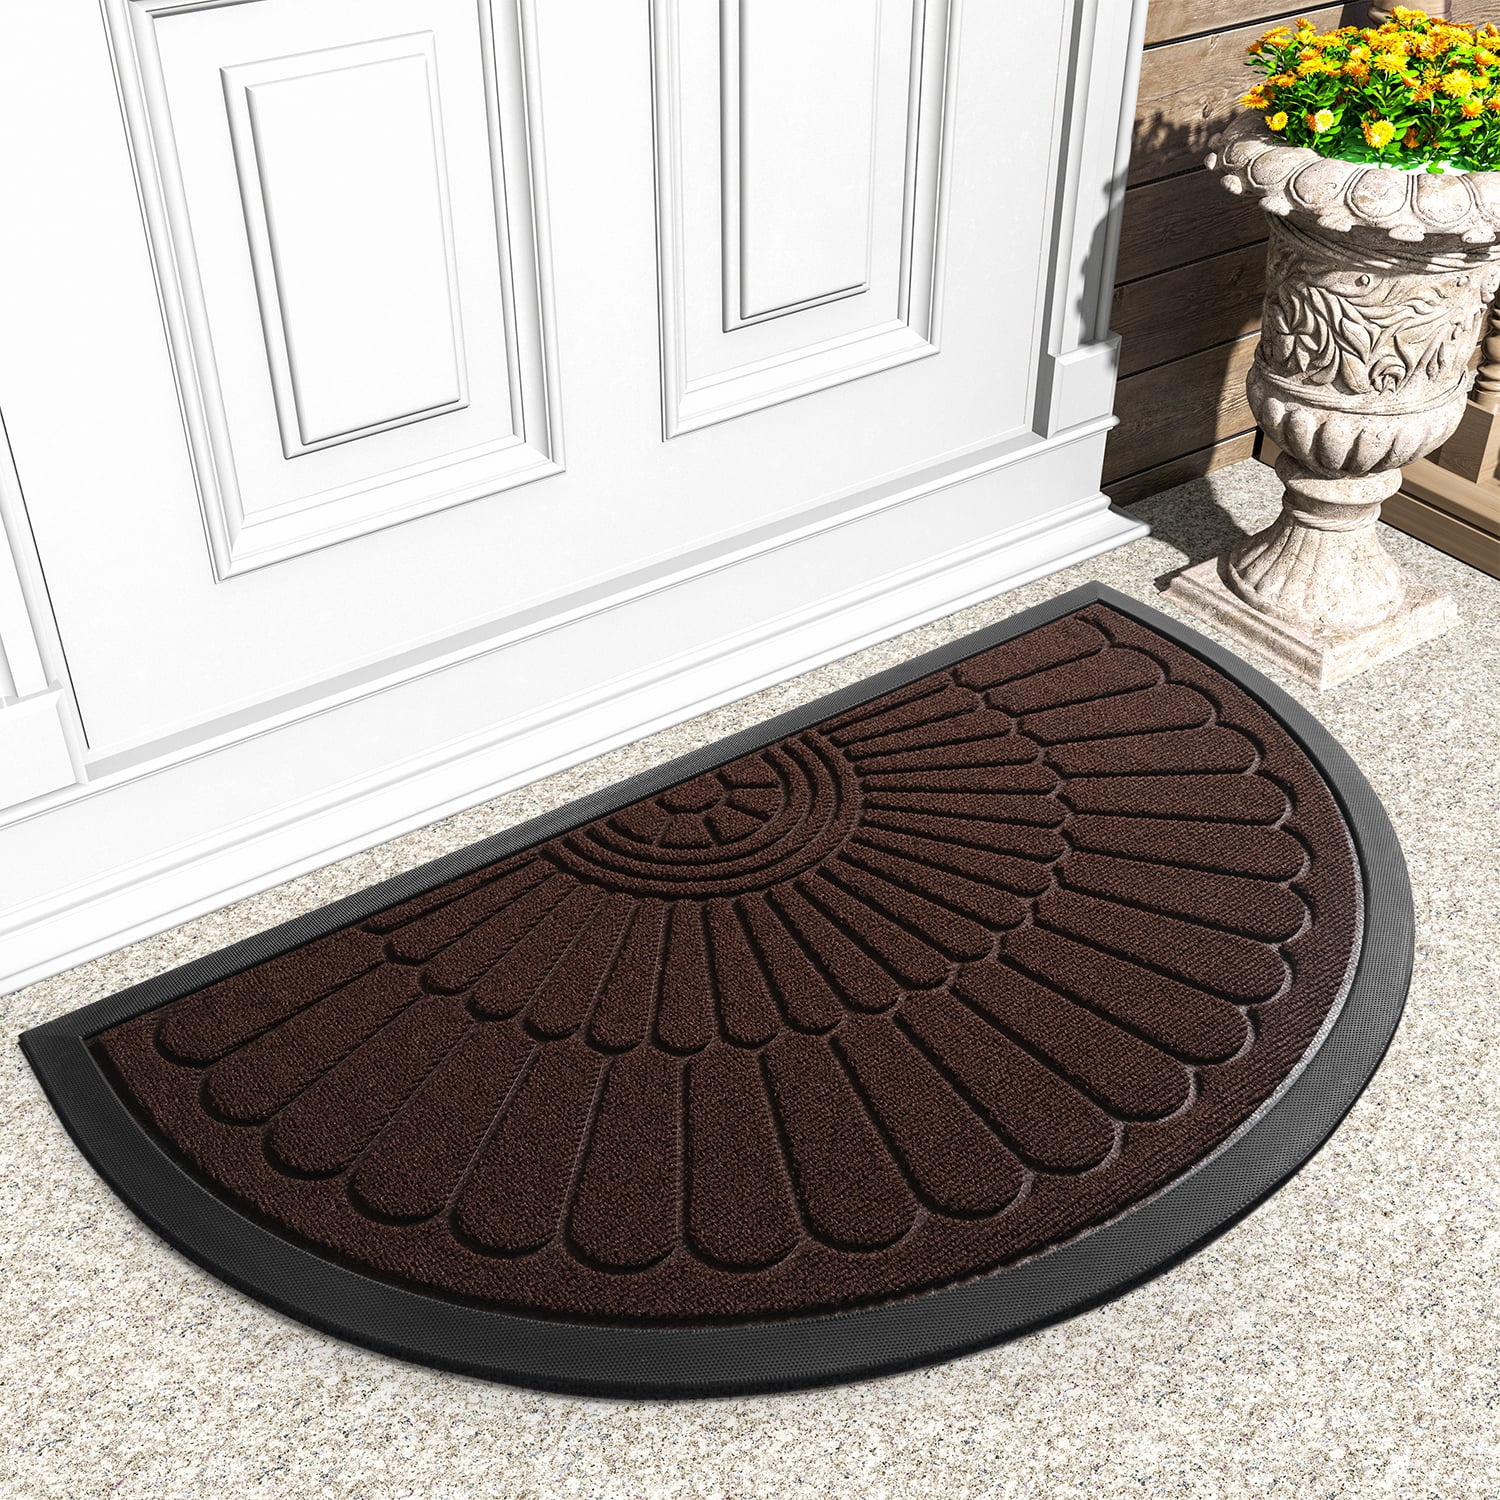 MTOUOCK Rubber Welcome Mats Outdoor, Large 24 * 36 Front Door Durable  Welcome Doormat for Front Door Outdoor, Non Slip Outdoor Mats for Home